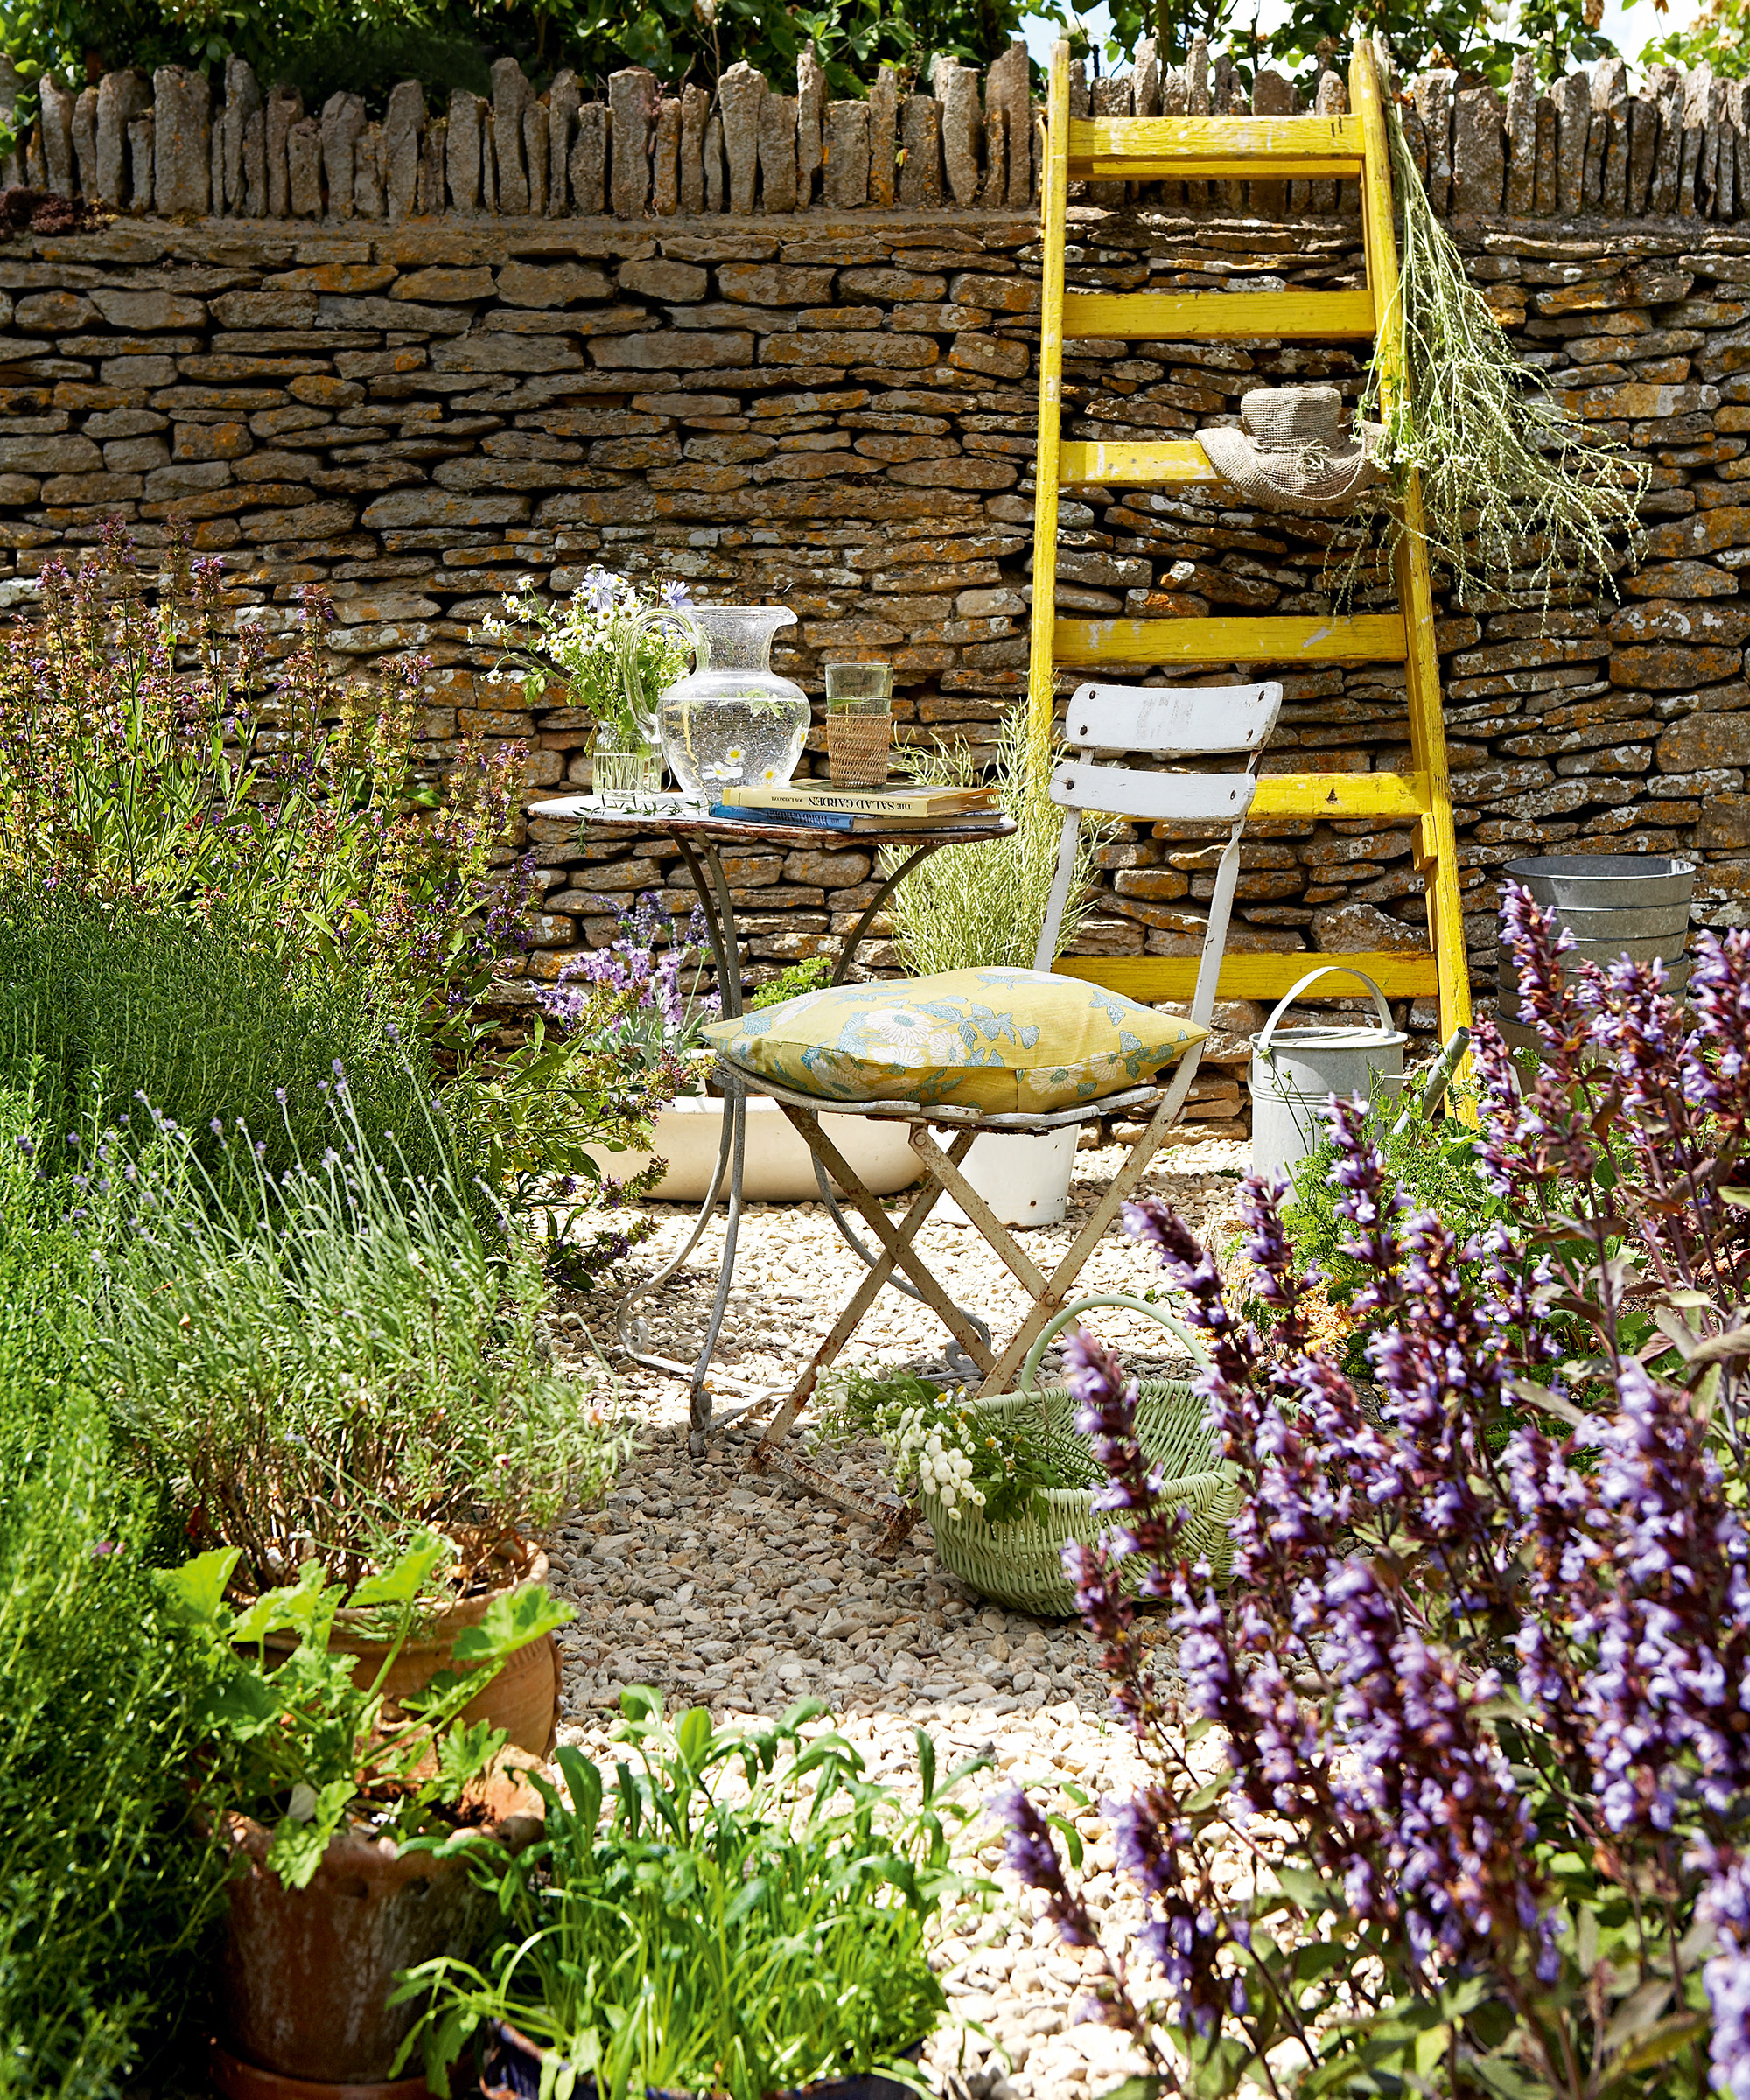 Patio planting ideas with herbs in a small gravel courtyard with bistro table and chairs.